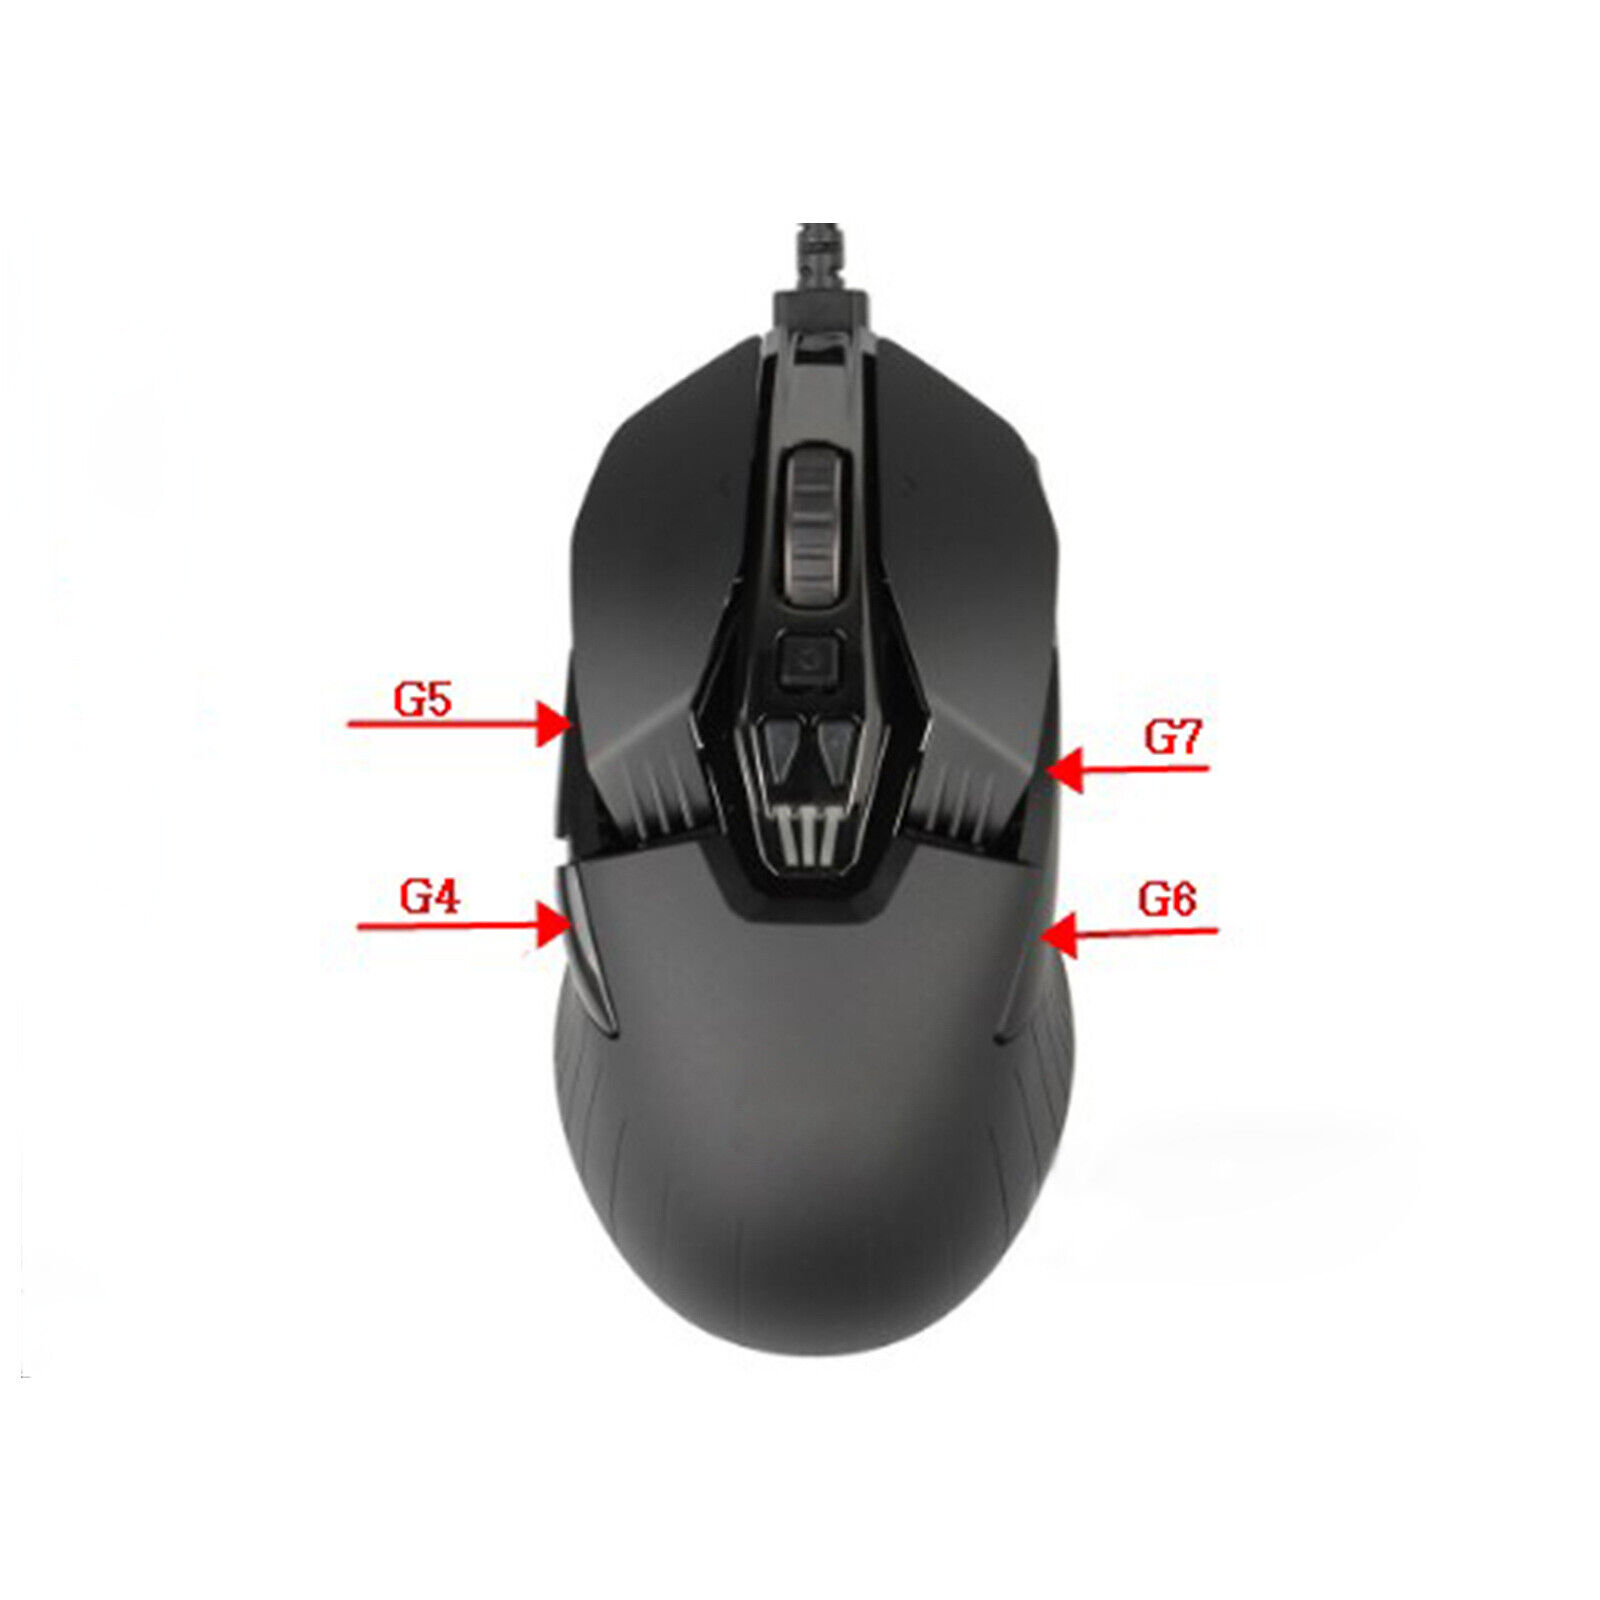 Cap Key For Logitech G900 G903 Wired Wireless Mouse Side Buttons G4 G5 G6 G7